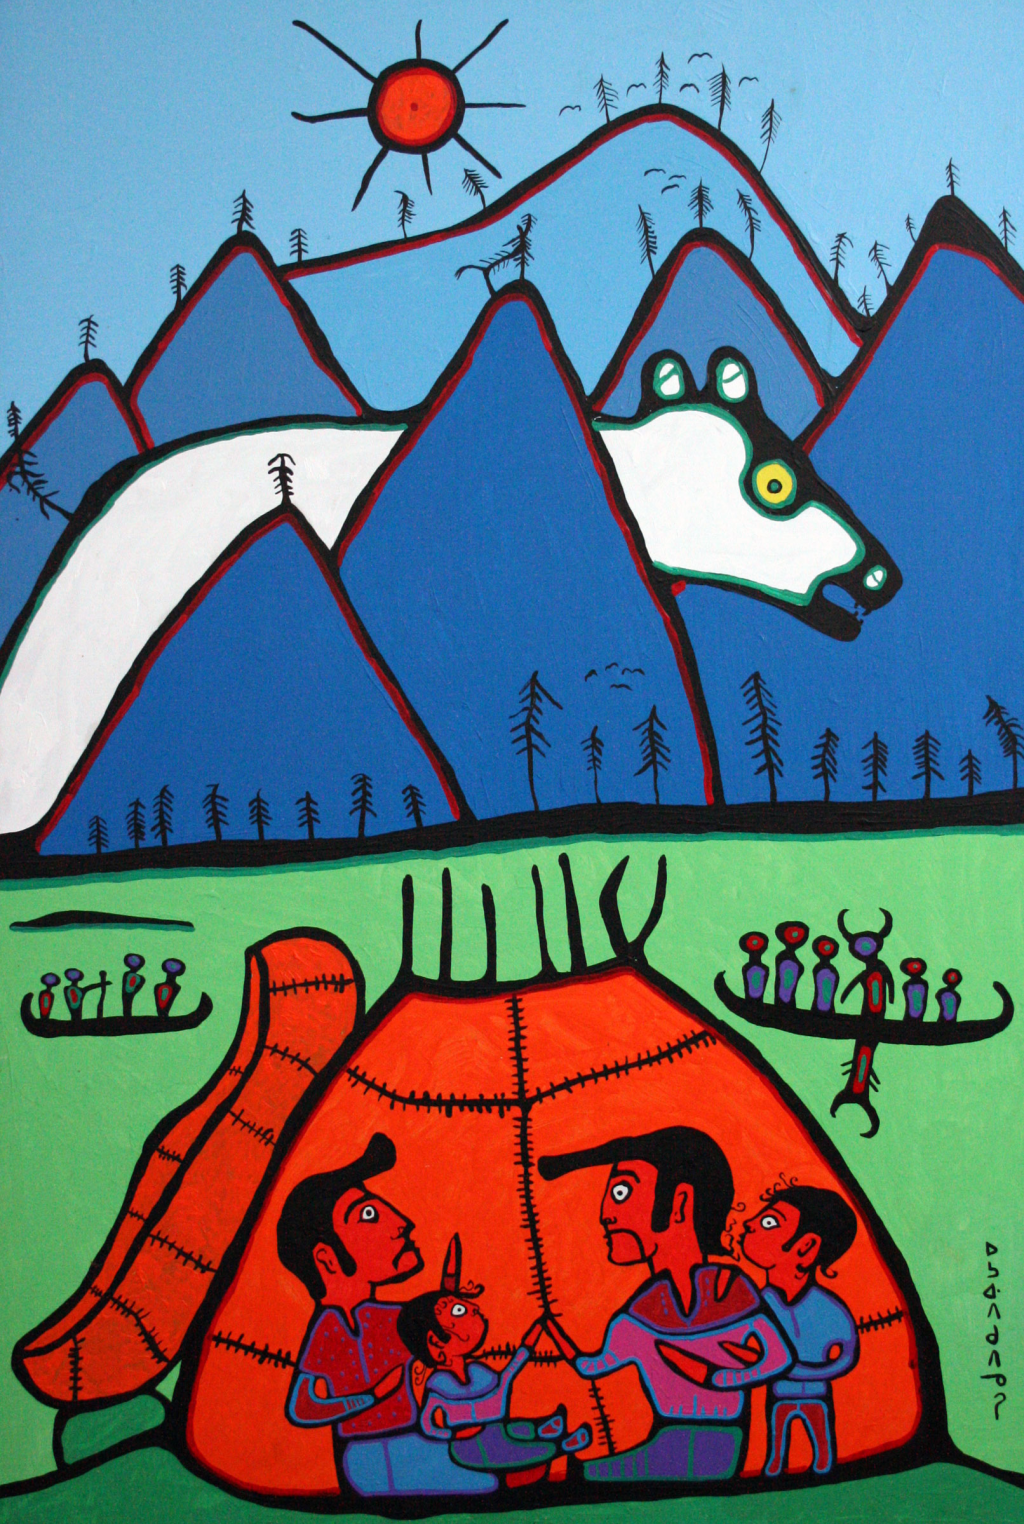 Paiting of a giant bear hiding in the mountains while a grandfather shares stories with his family